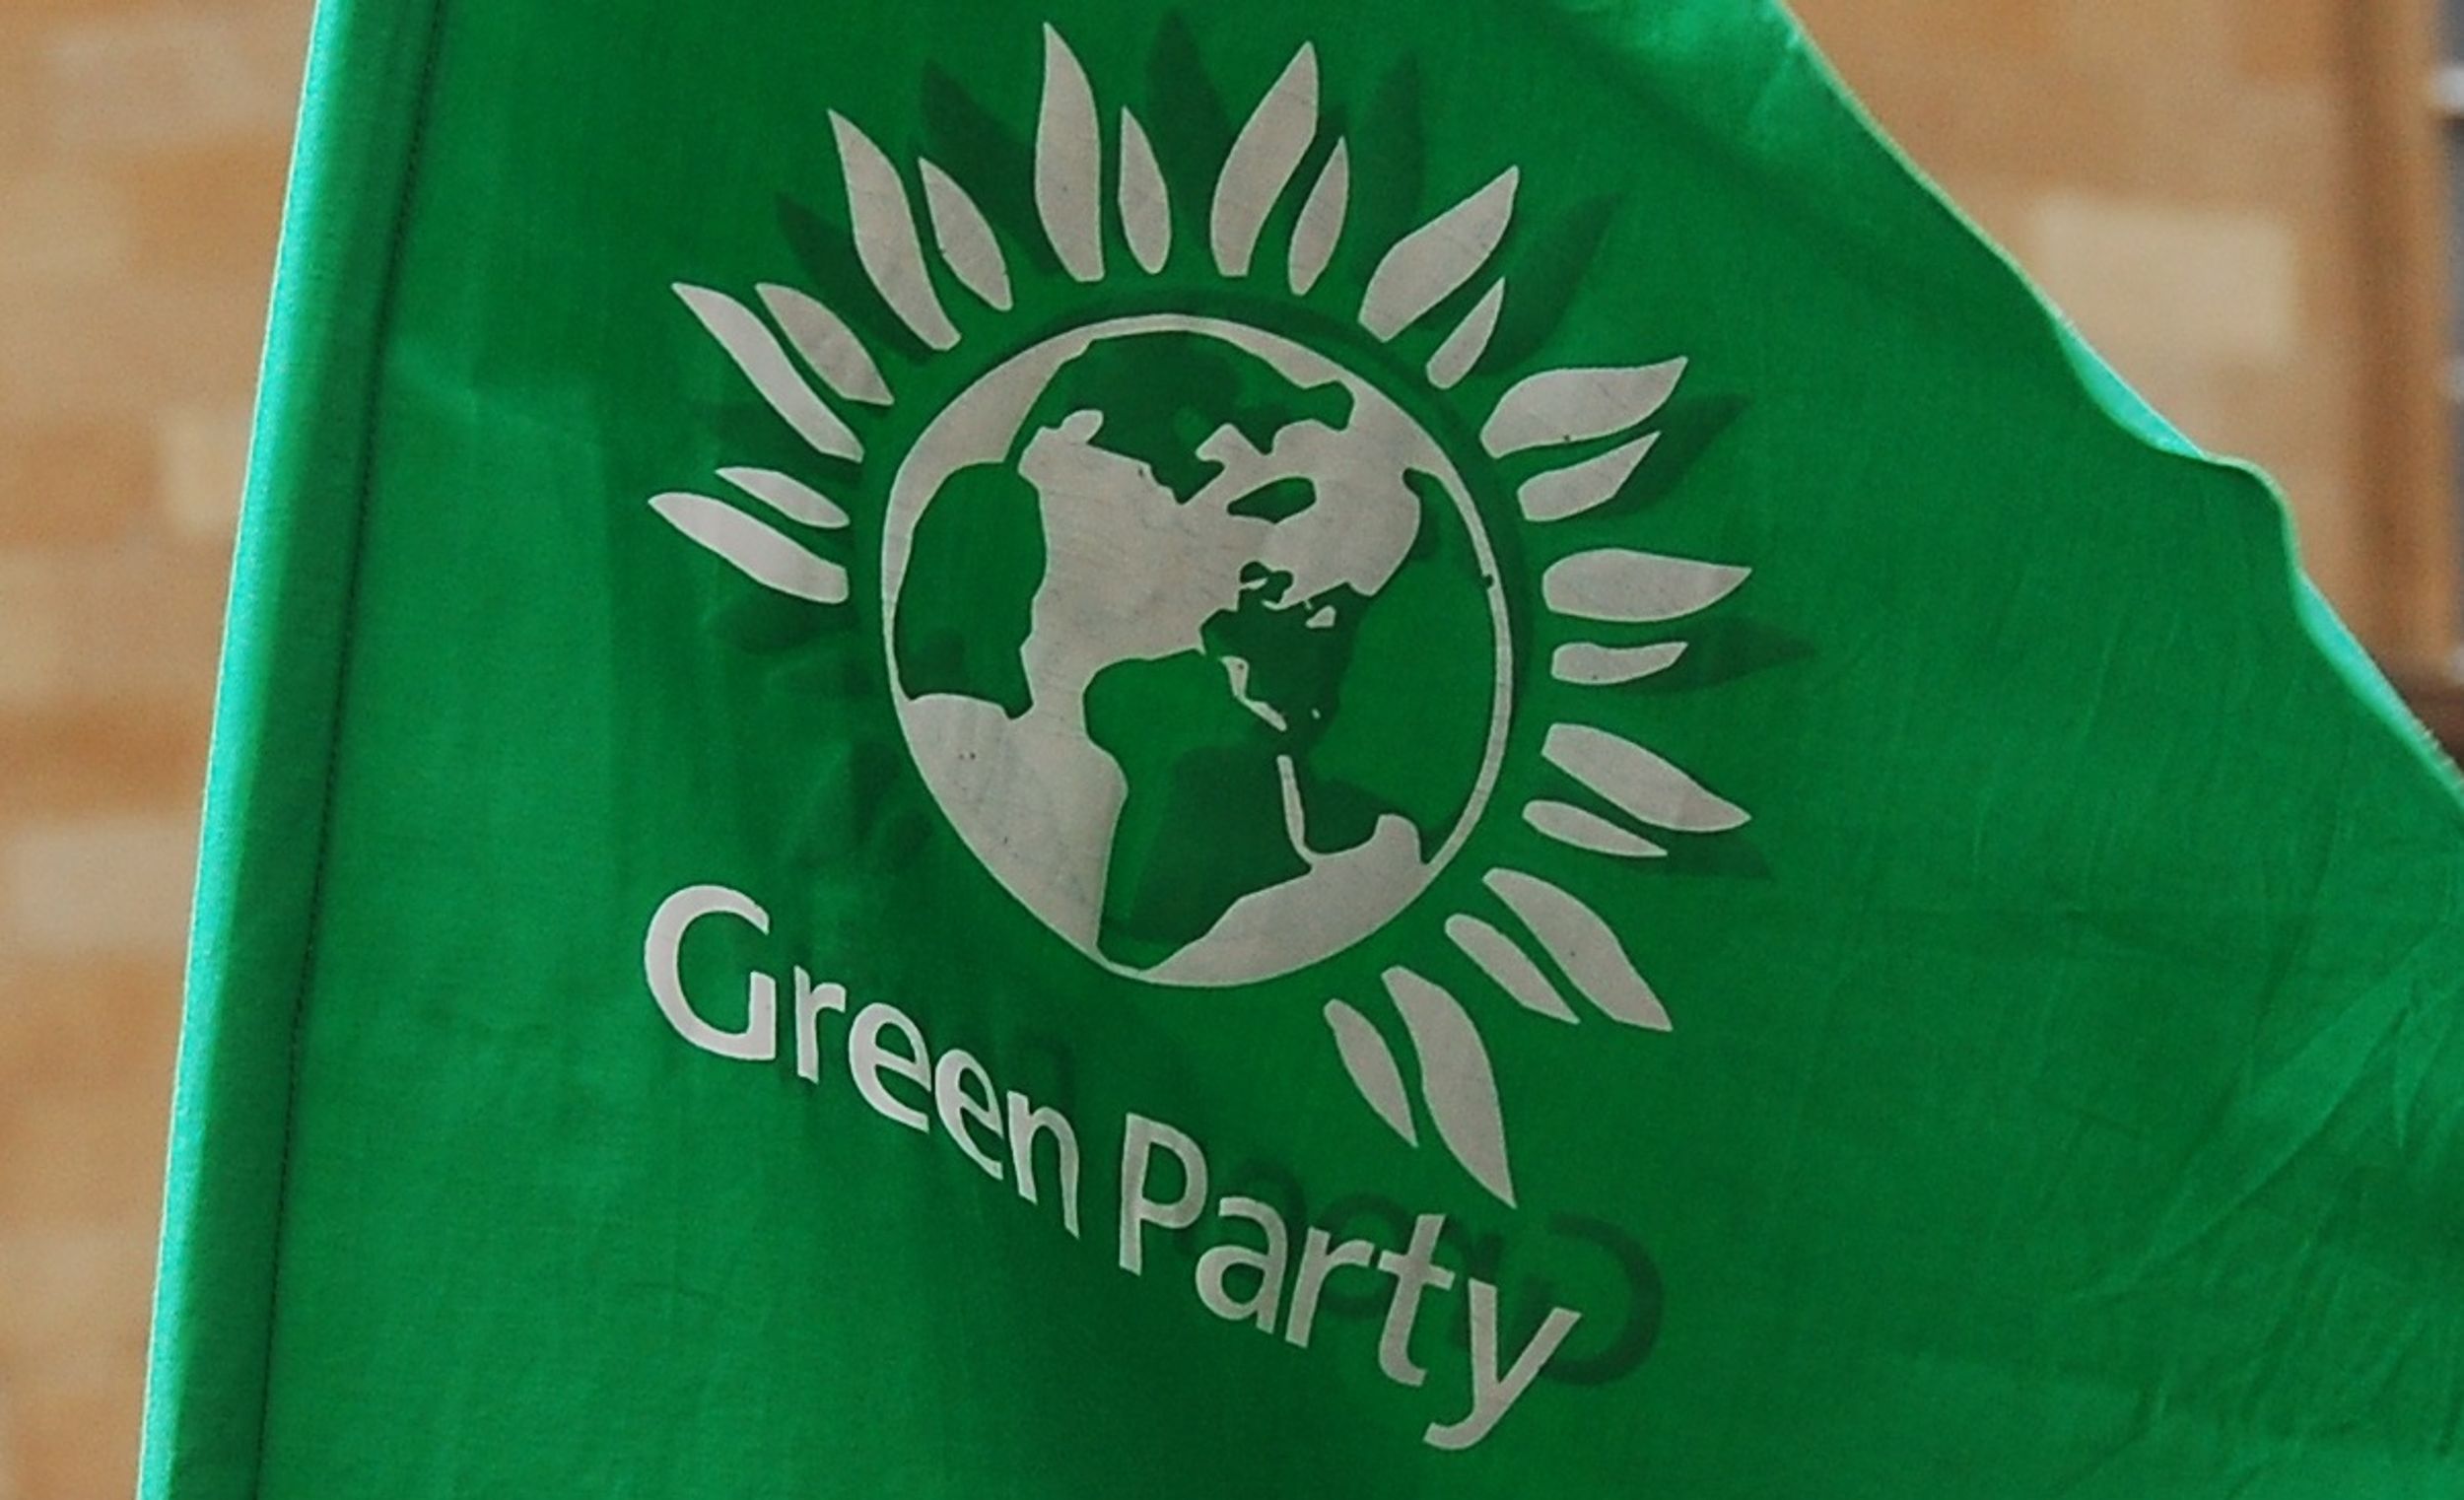 5 Reasons I Support The Green Party Over The Democratic Party